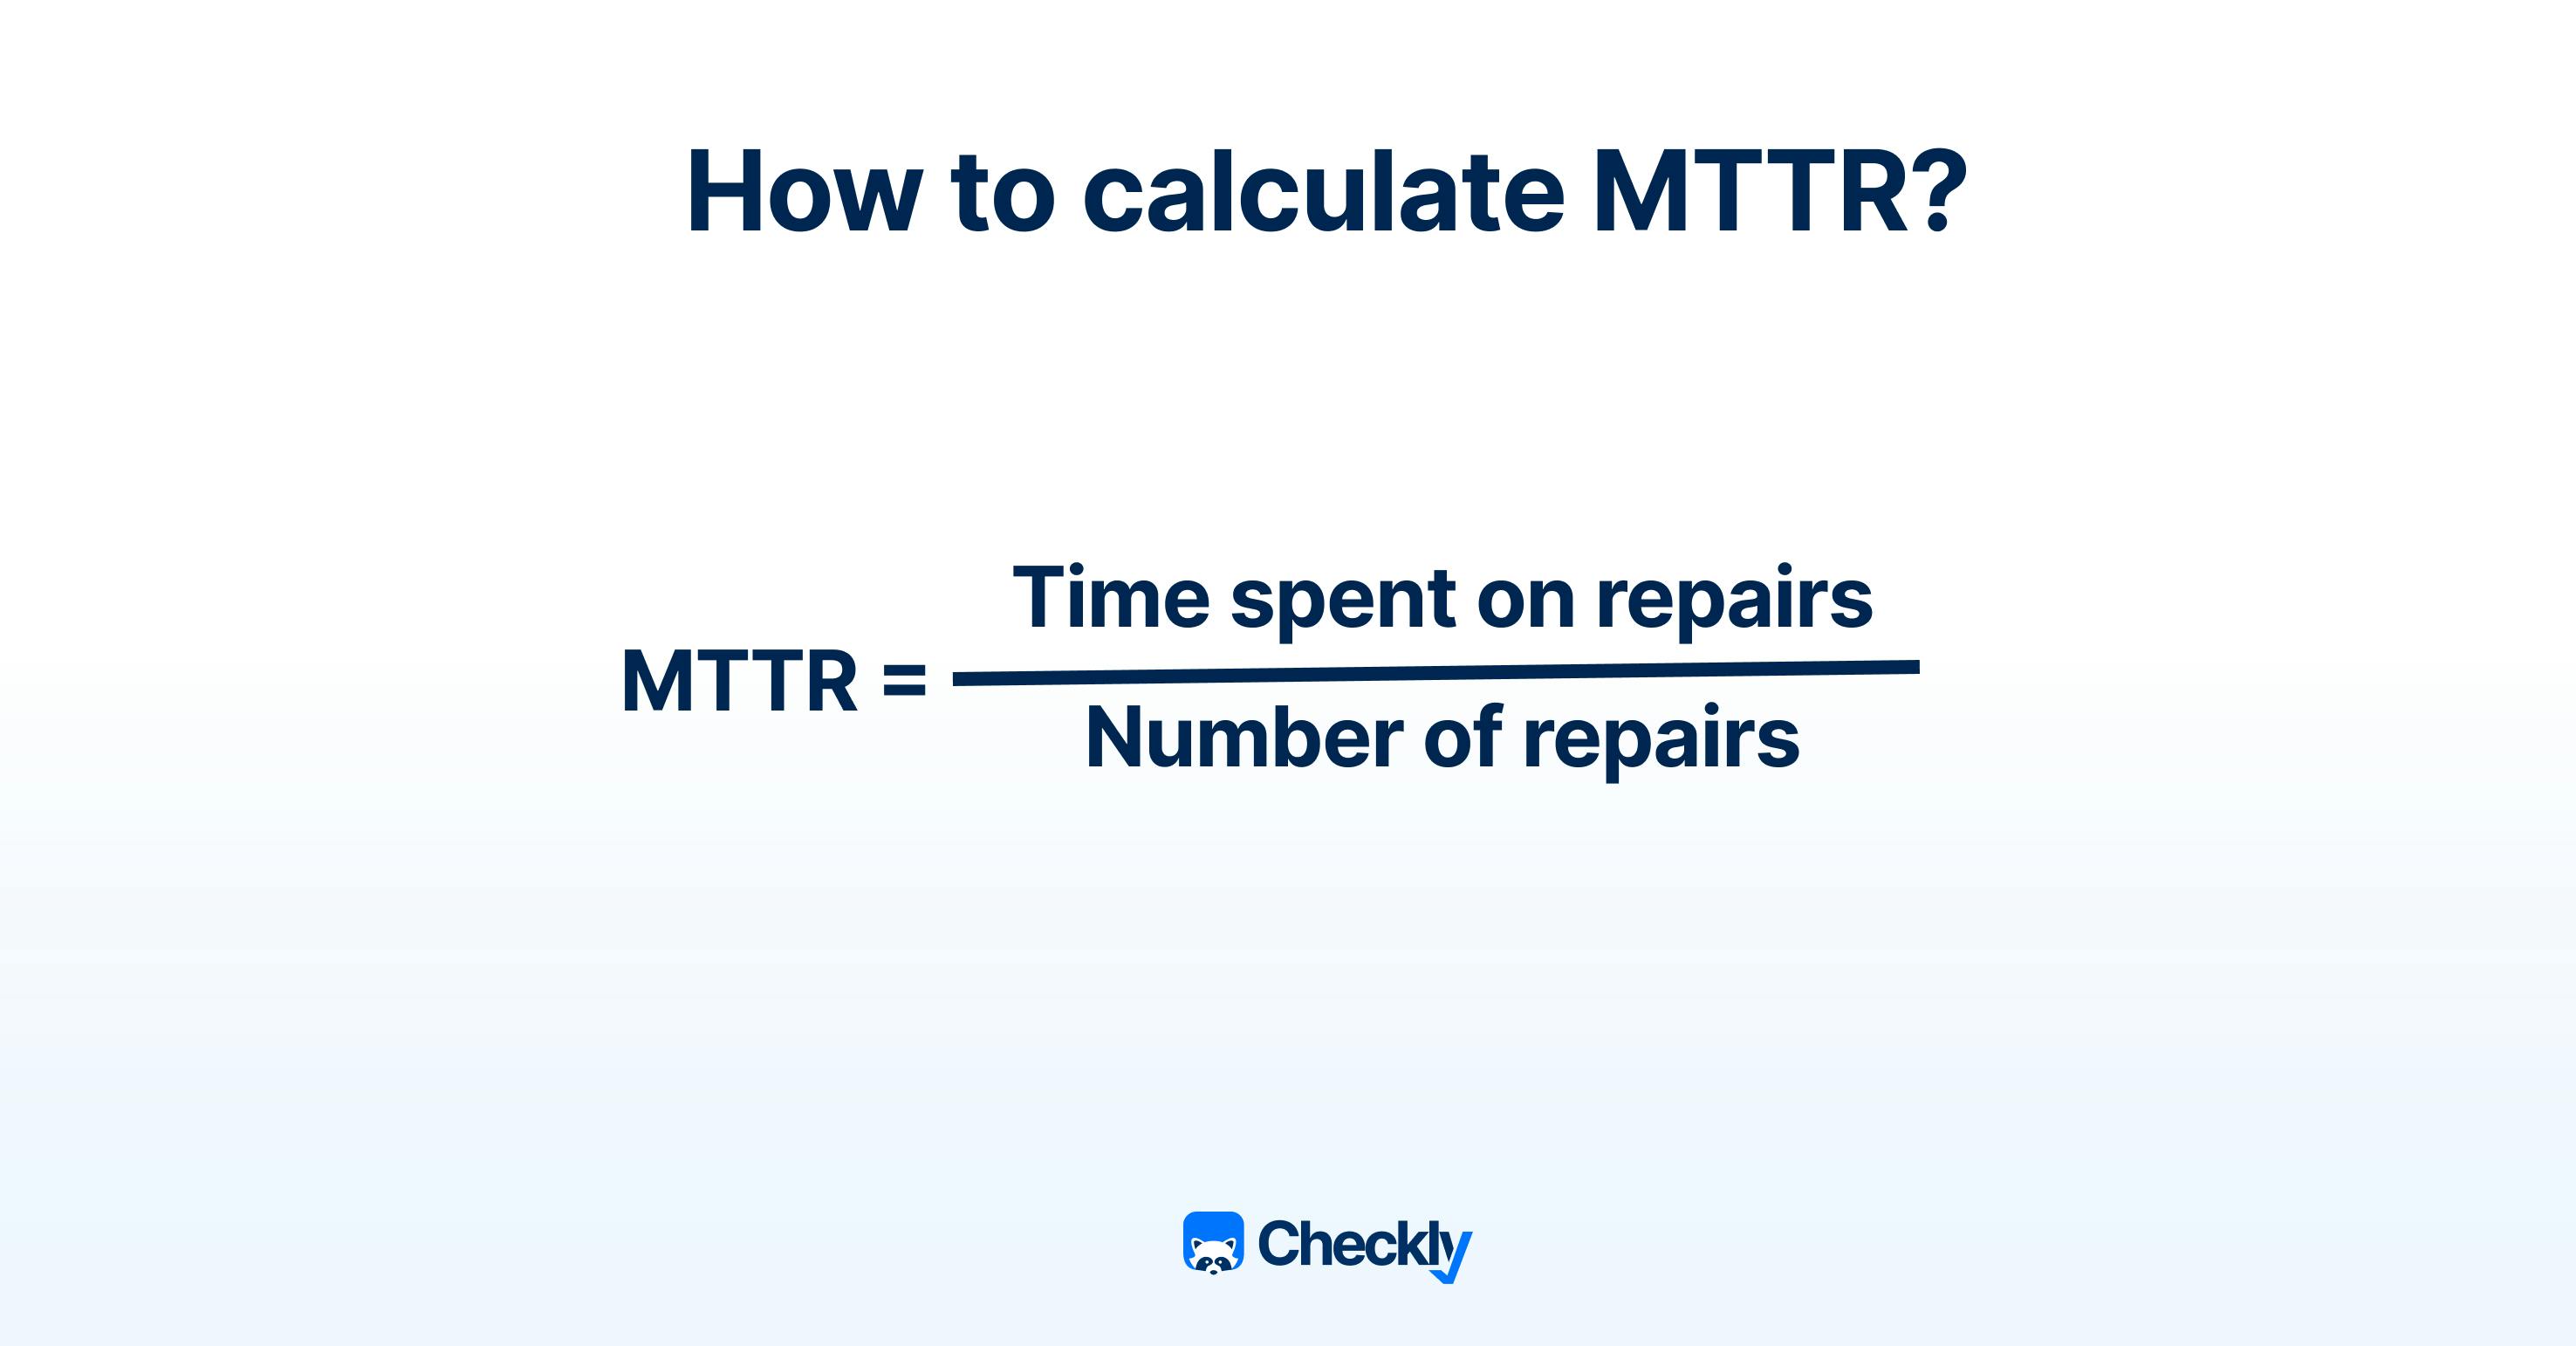 MTTR calculation explained: divide time spent on repairs by number of repairs